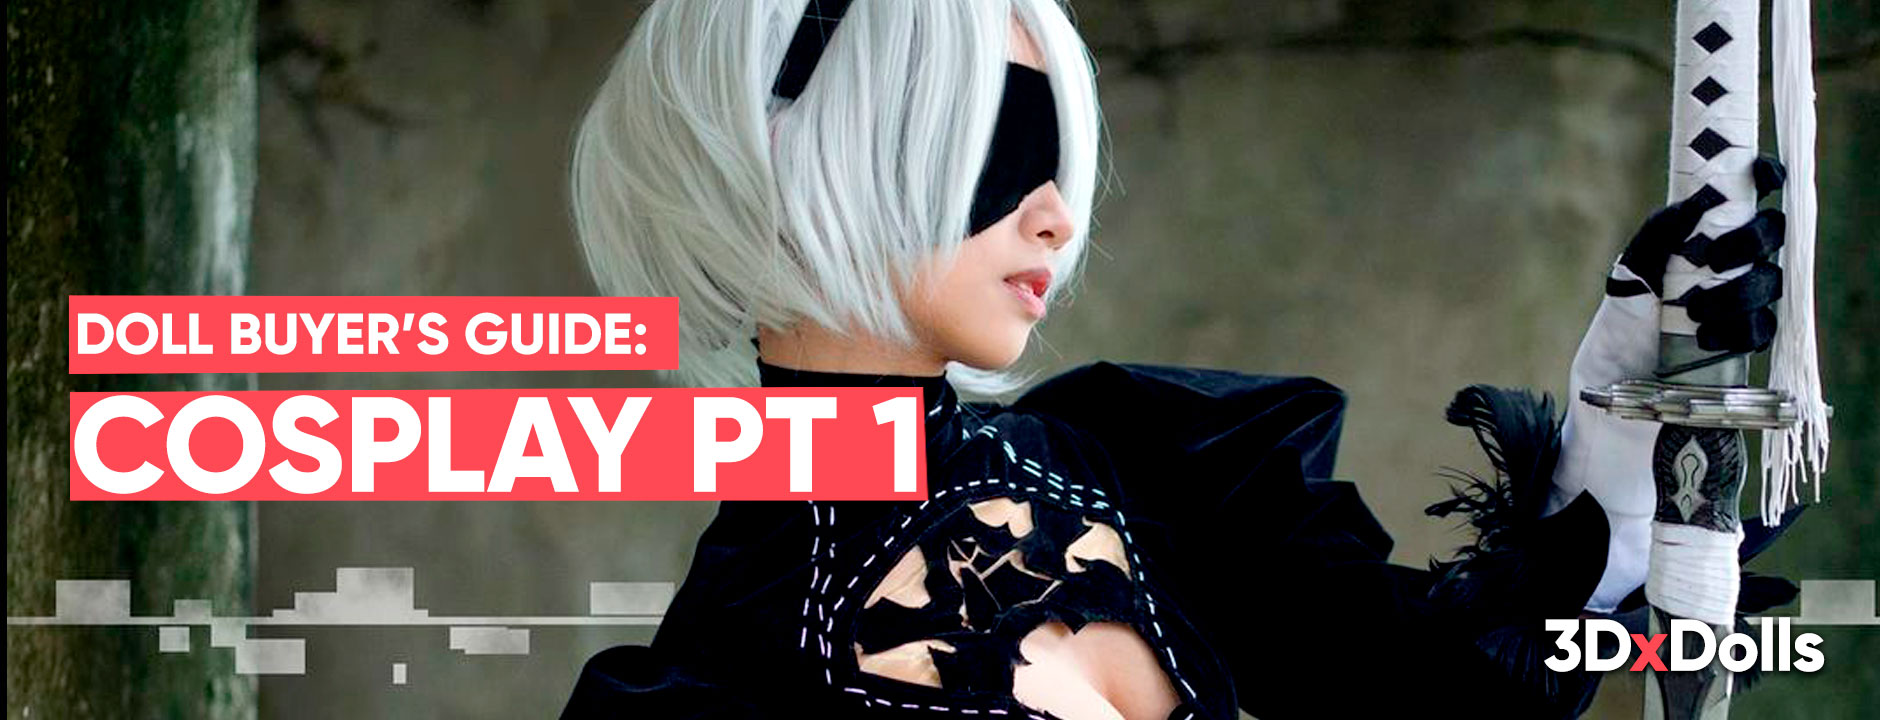 Doll Buyer's Guide: Cosplay Pt 1